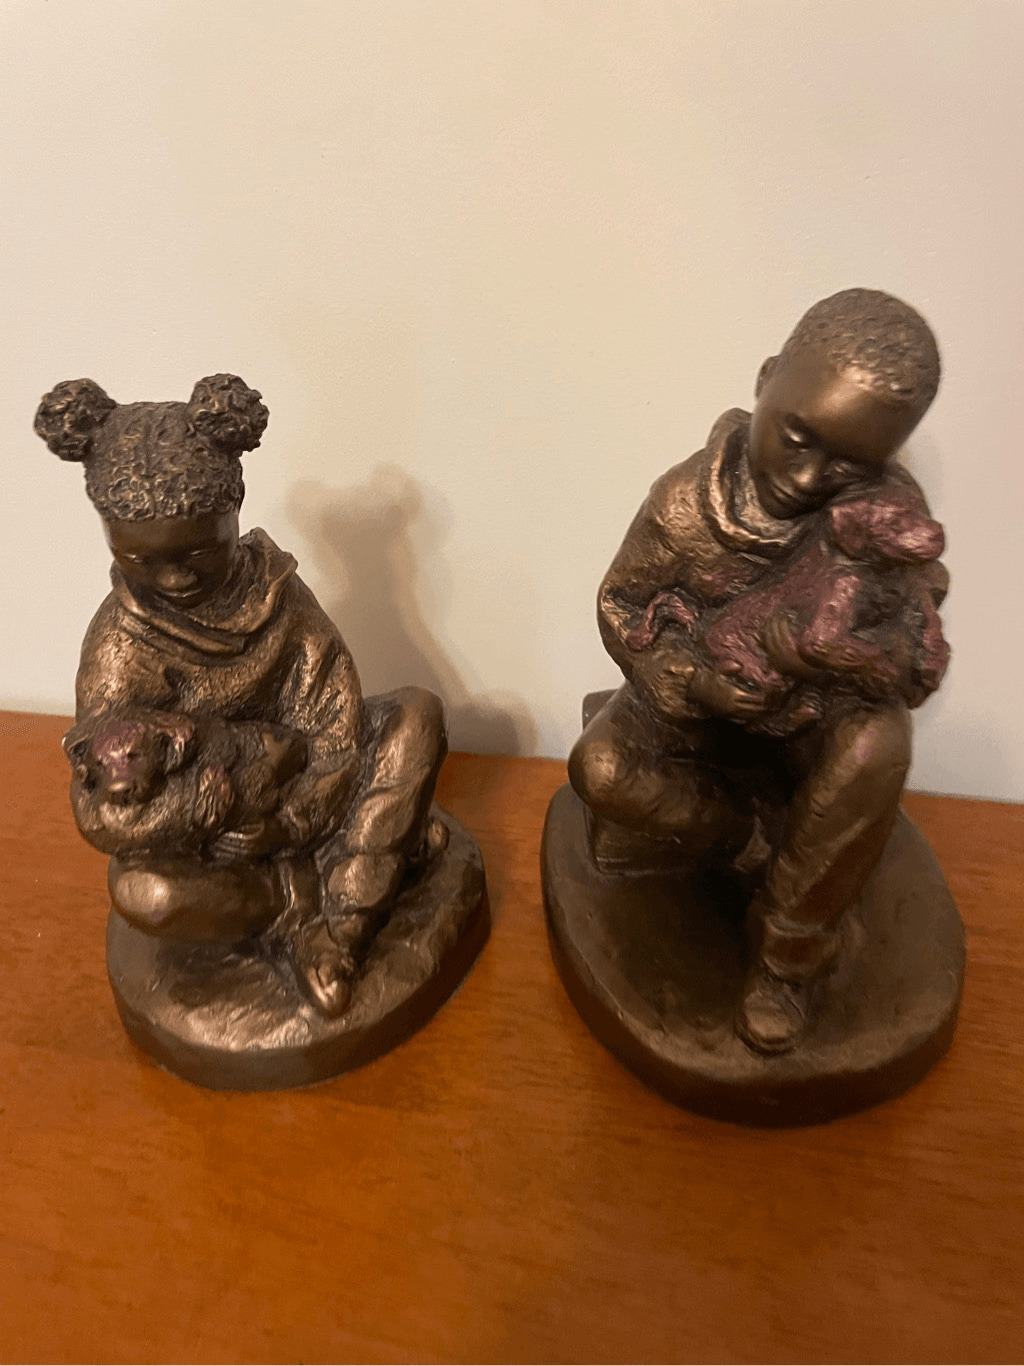 AUSTIN 1995 2 Sculpture Signed Alice ECILA Boy and Girl  Holding a Dog Bronze/Go